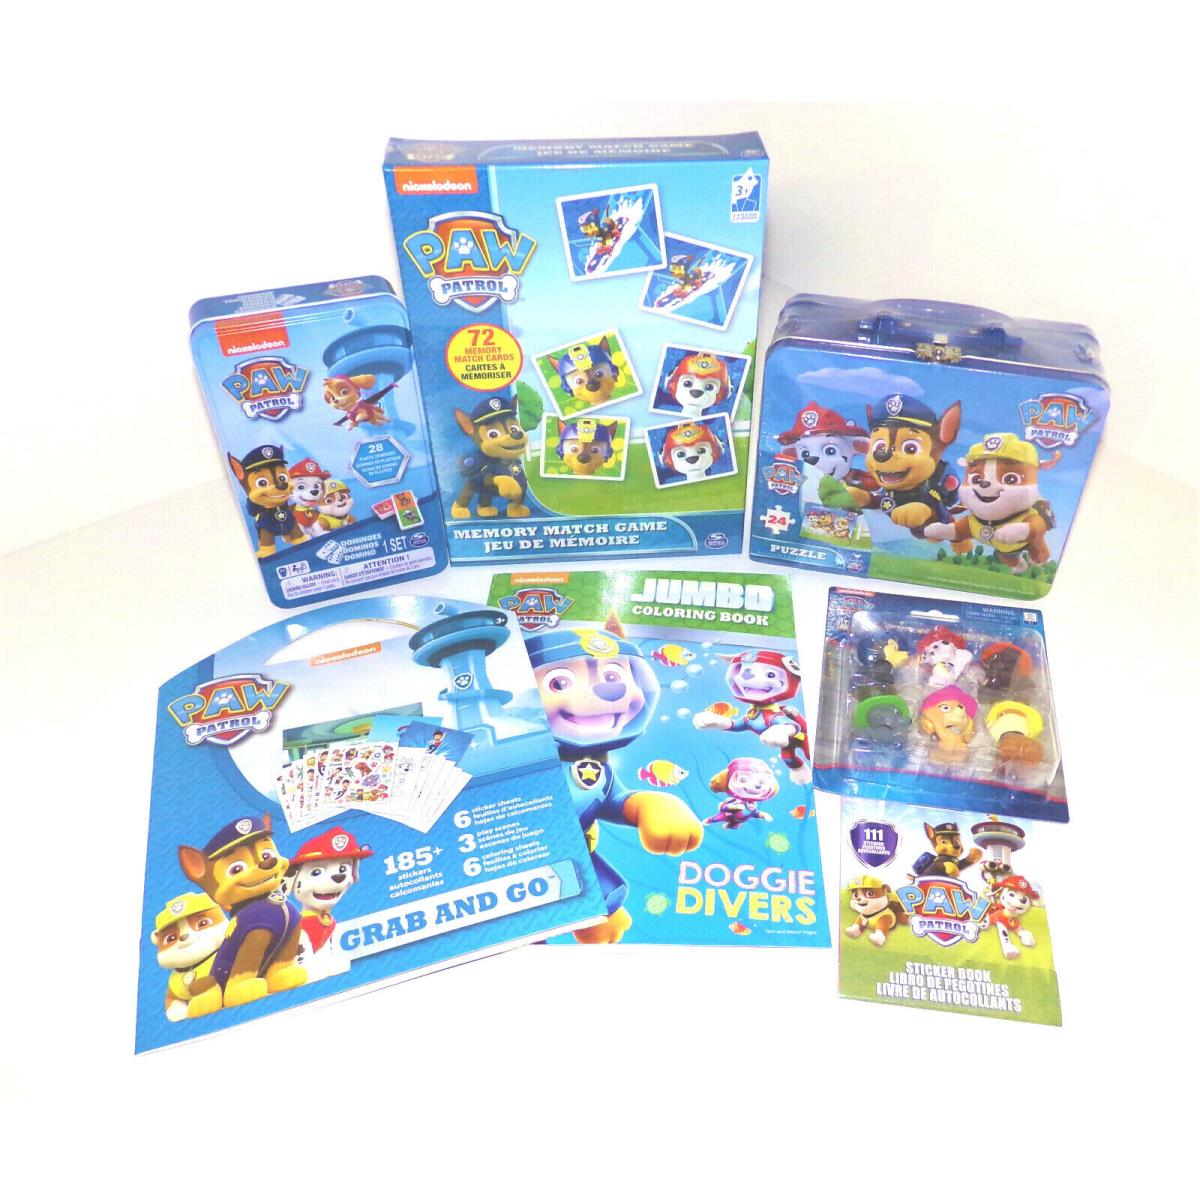 Paw Patrol Gift Set - Learn Play Activity Toy Bundle with Pup Action Figures